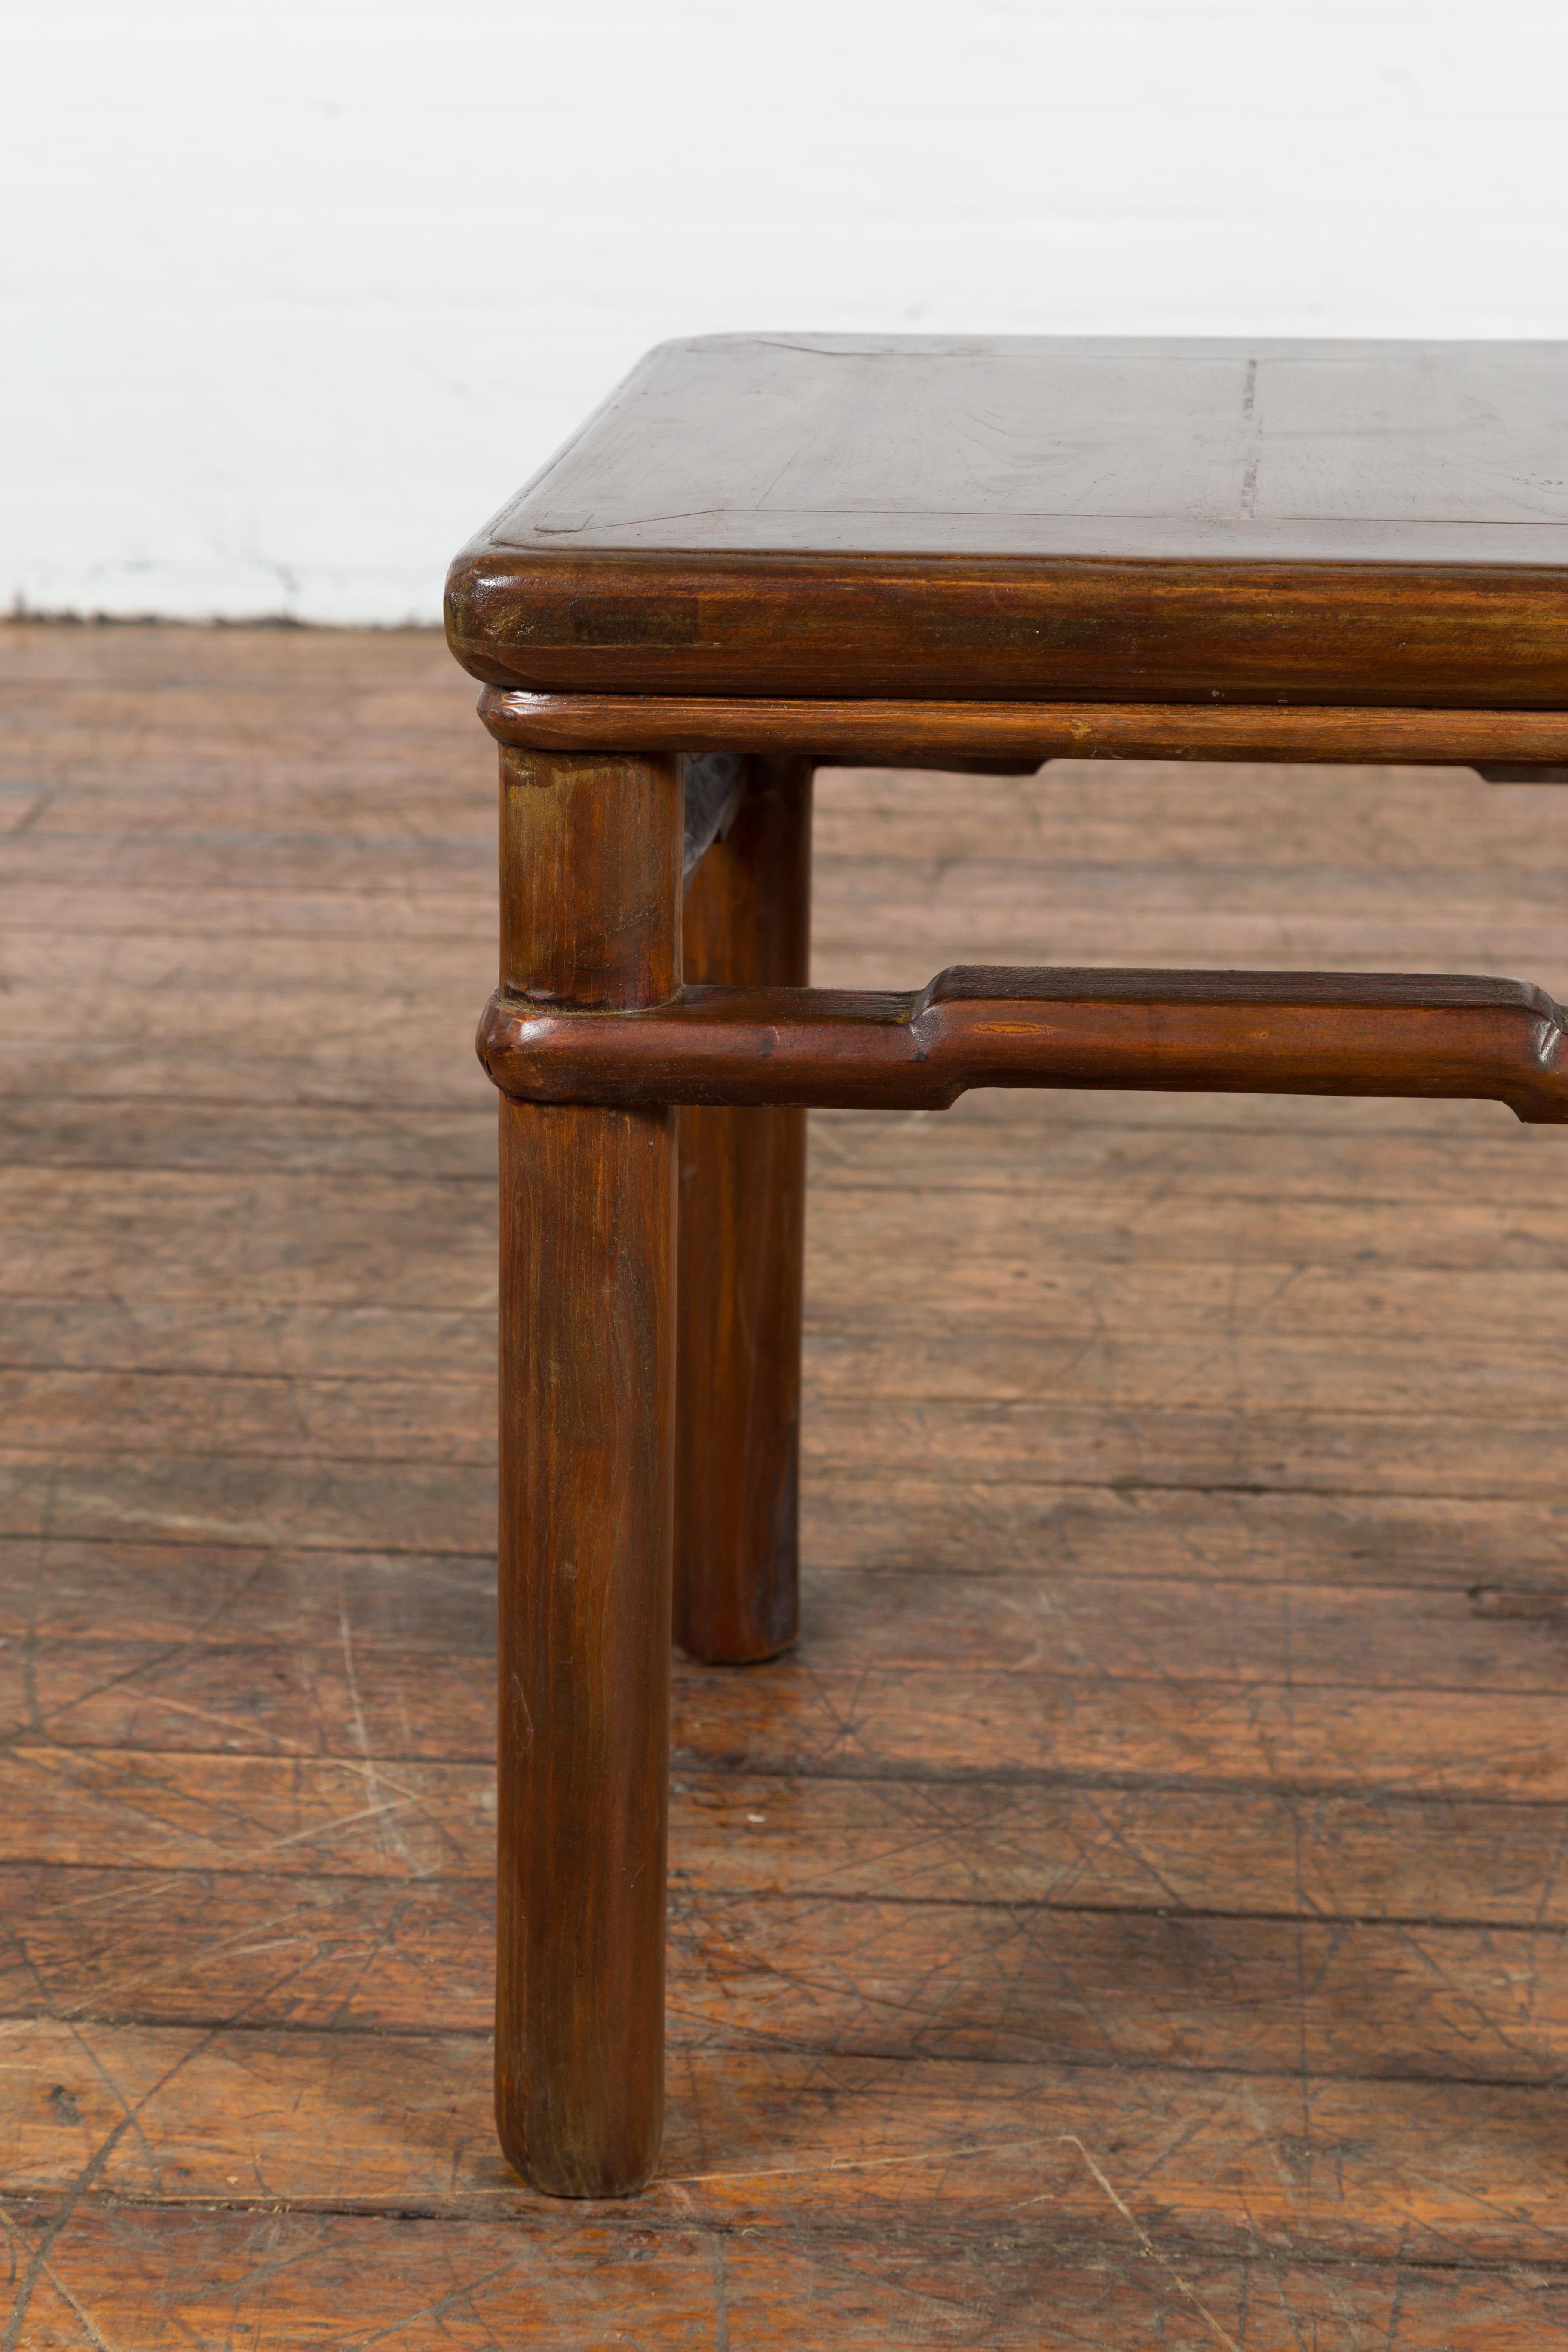 Chinese Qing Dynasty Period 19th Century Side Table with Humpback Stretchers For Sale 3